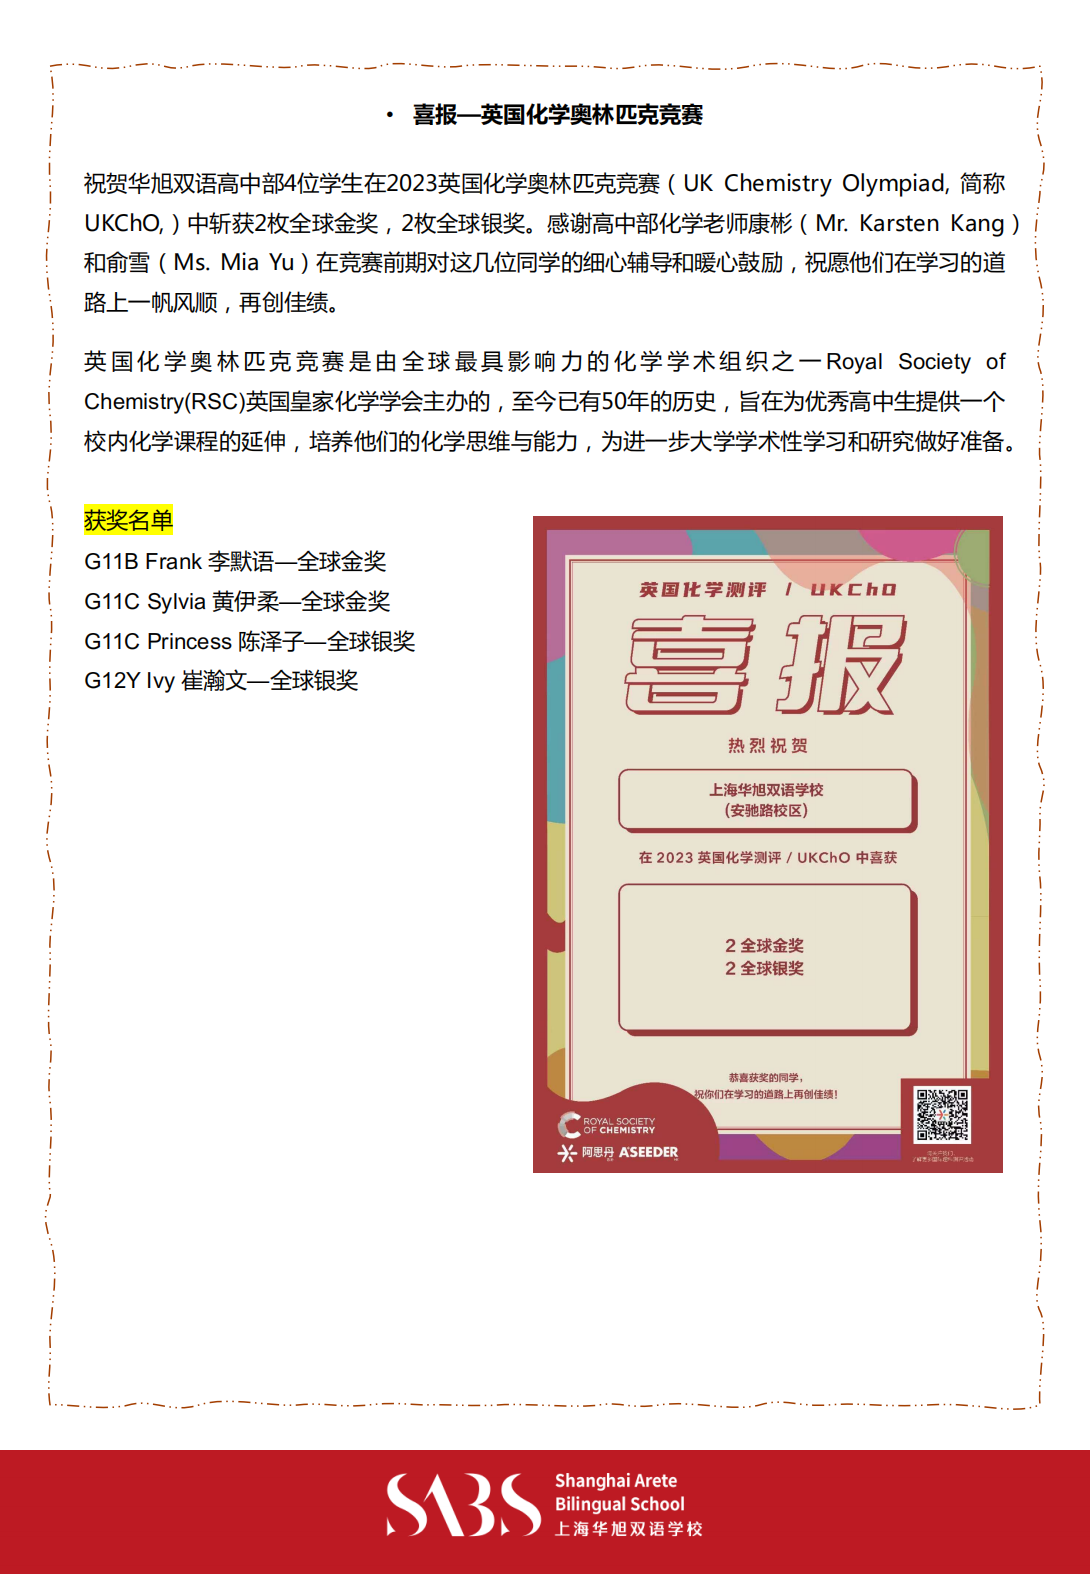 HS 5th Issue Newsletter pptx（Chinese)_14.png